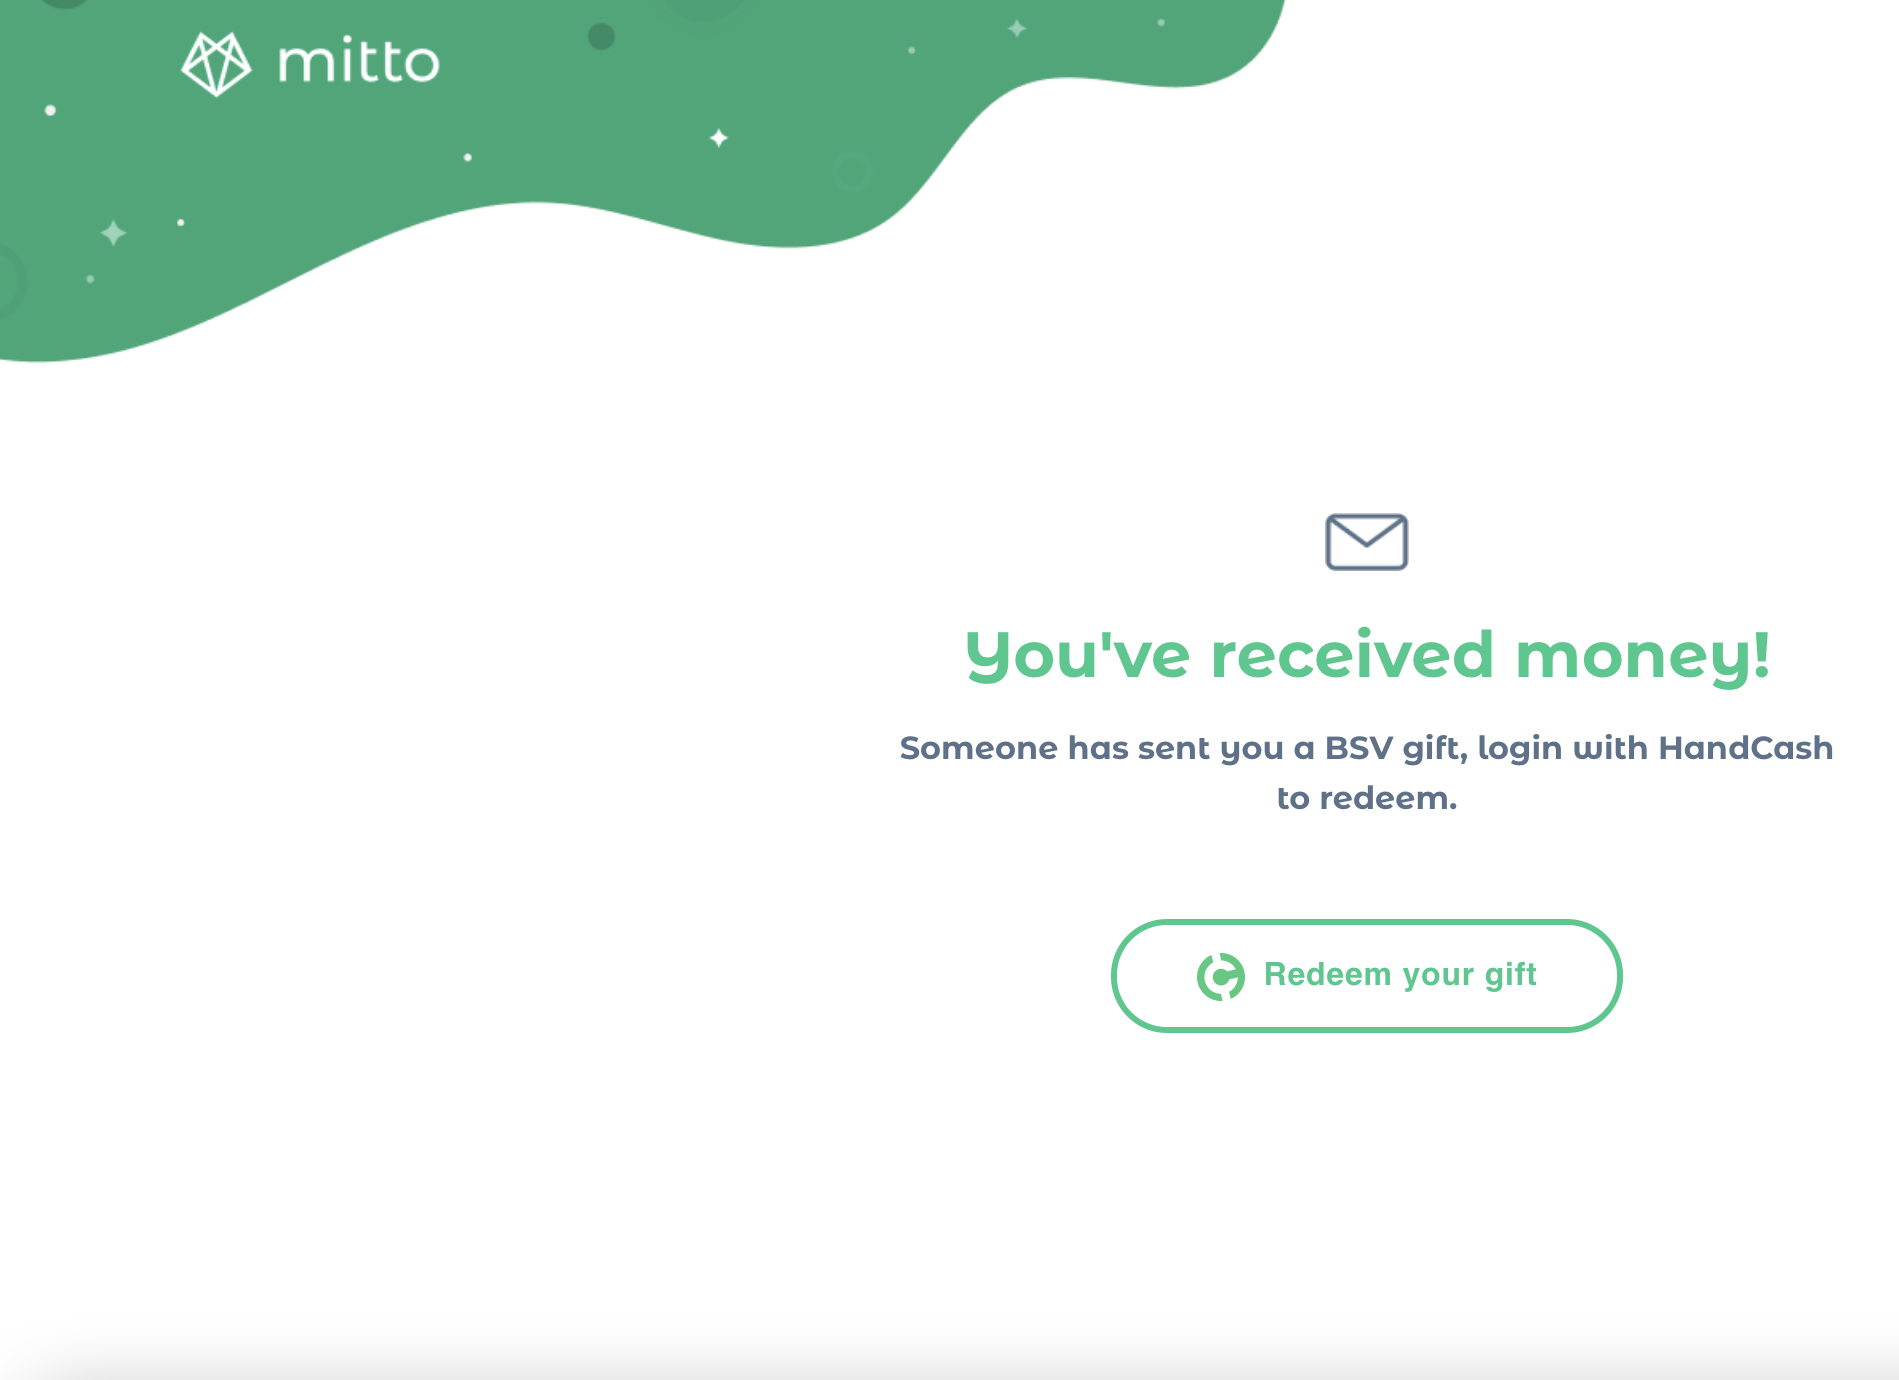 Mitto Received